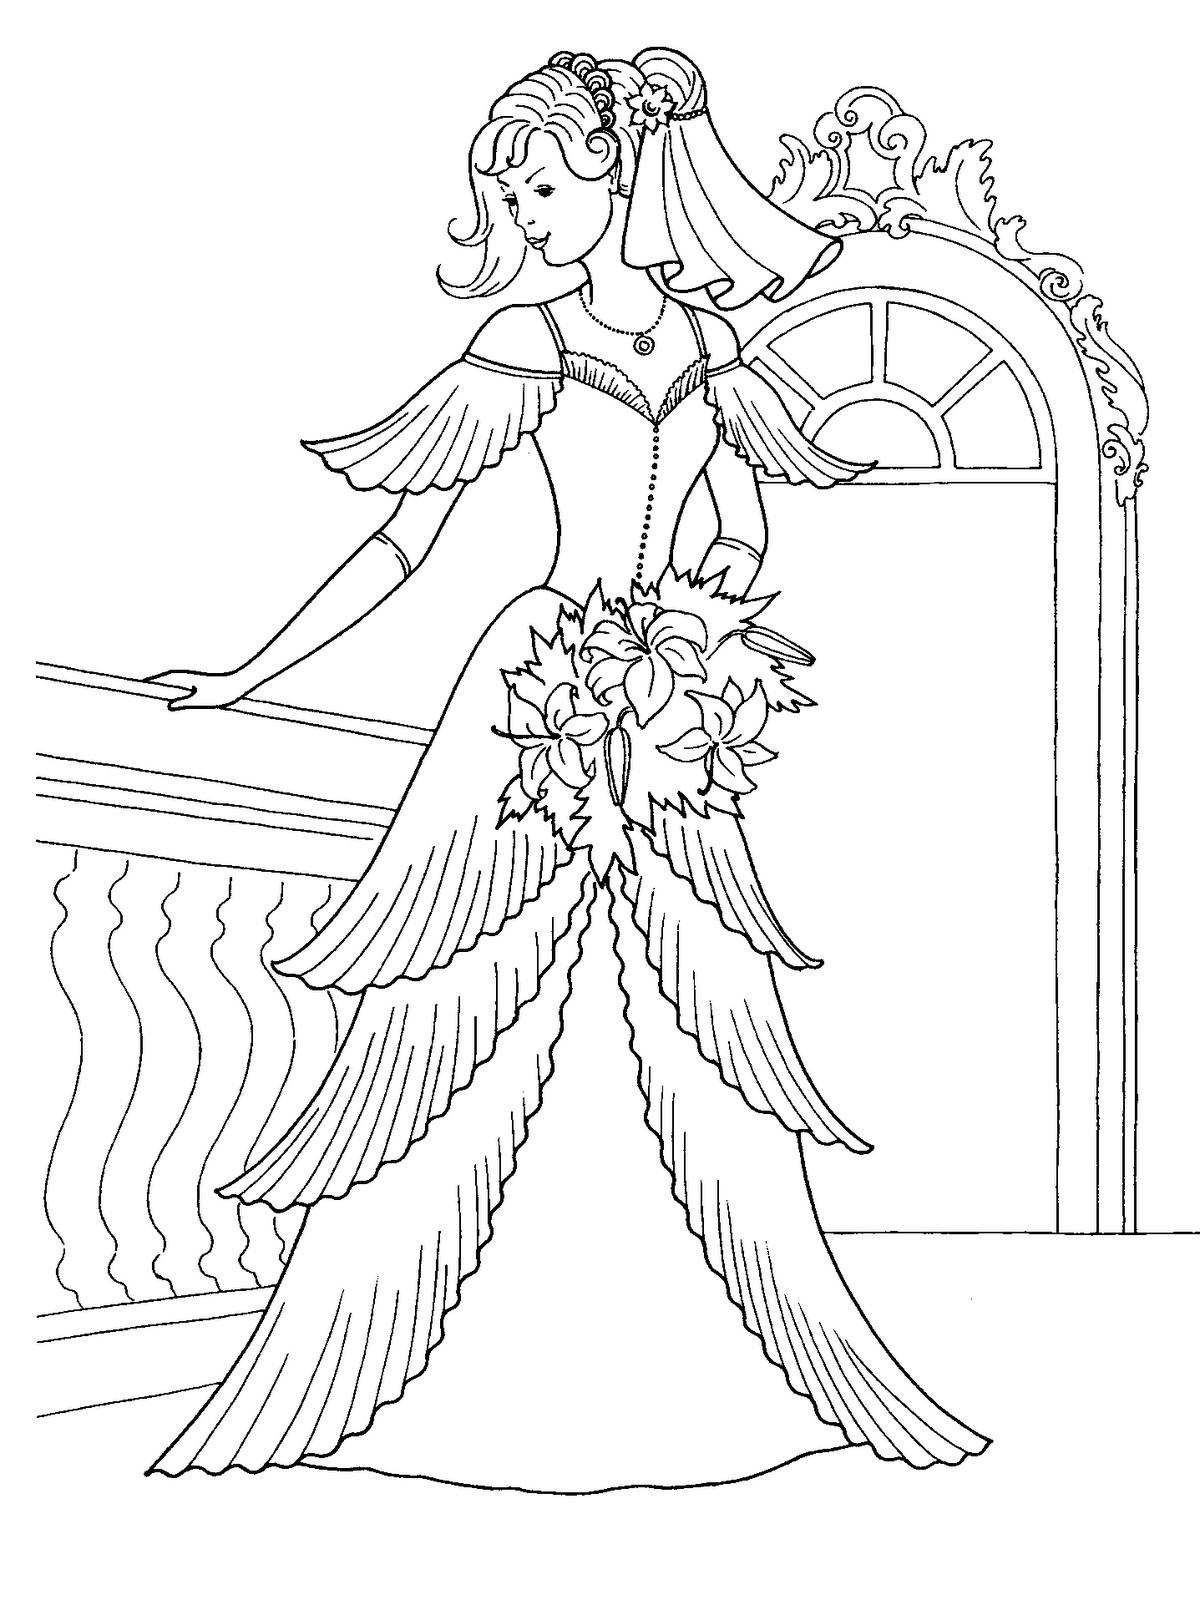 Wedding Dress Coloring Pages
 The Wedding Dresses Princess Coloring Sheet to Print